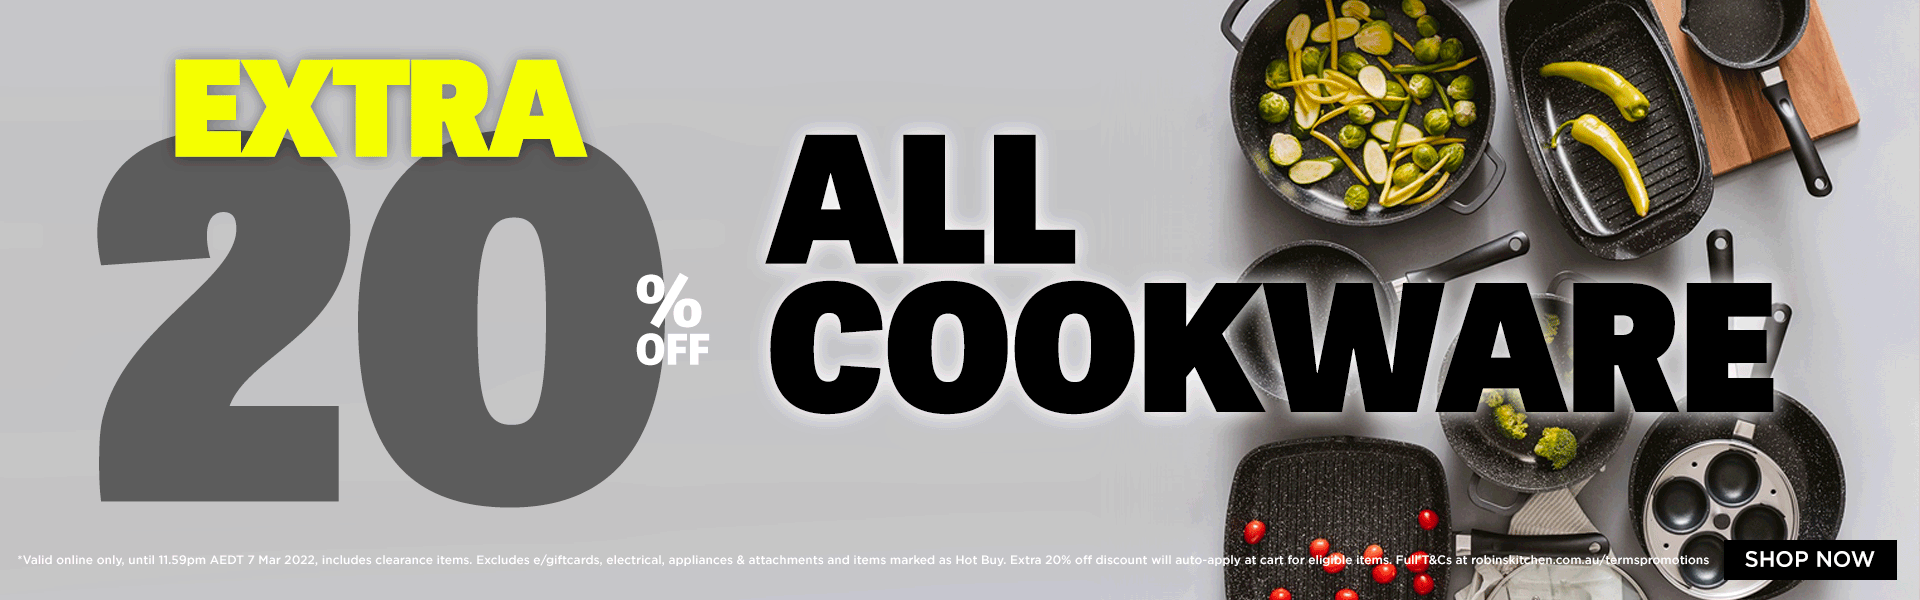 Robins Kitchen extra 20% OFF on all Cookware including Bacarat, Chasseur & more